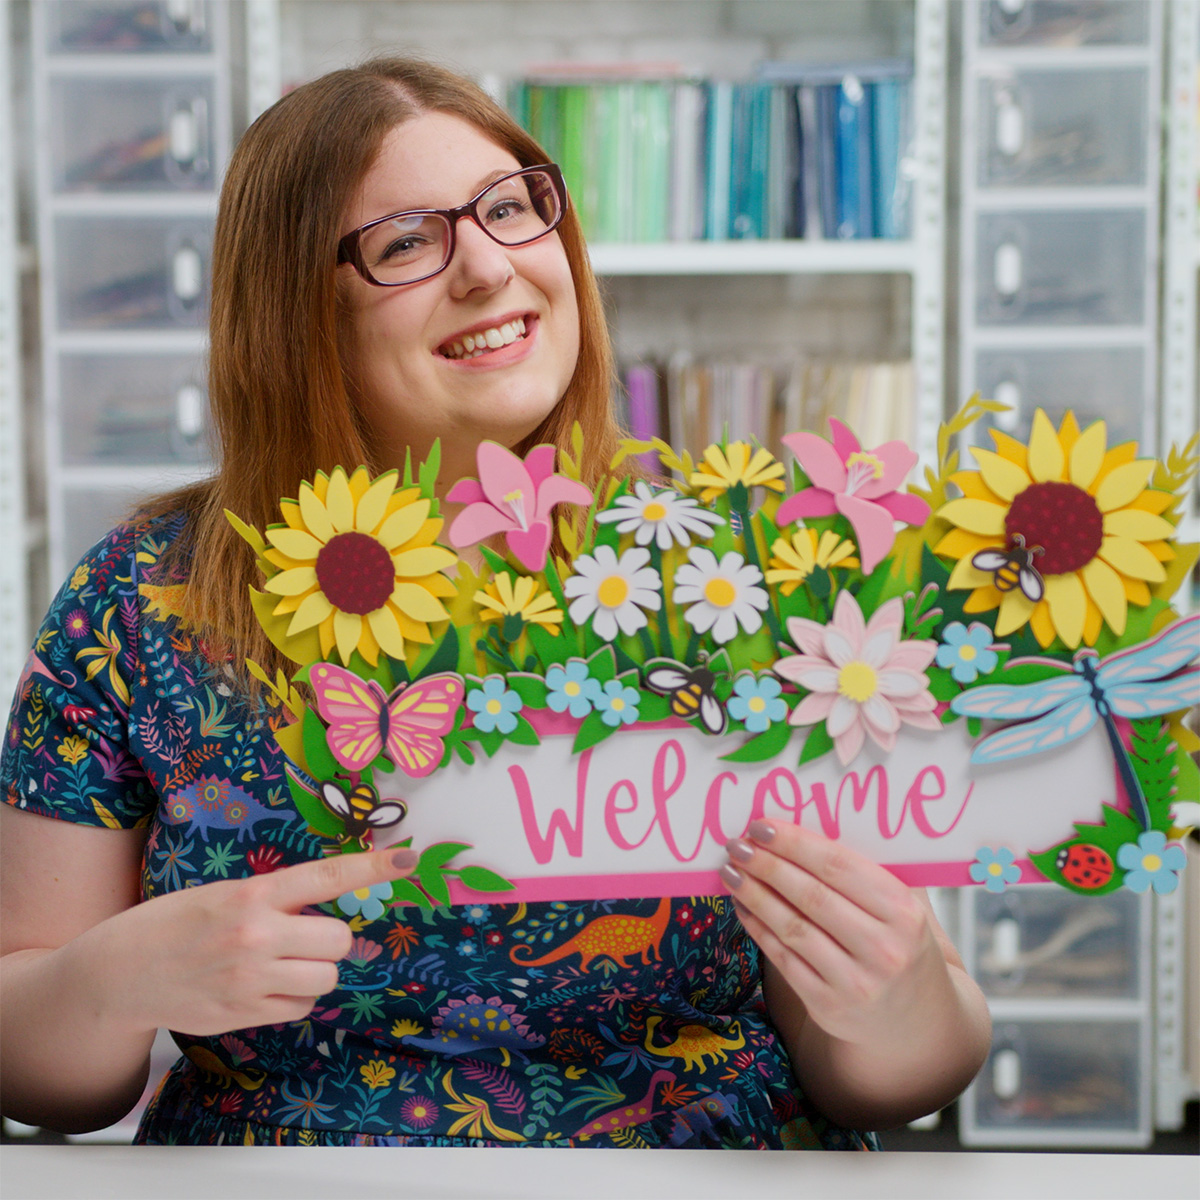 Make Giant Paper Flowers for Summer with this Off-the-Mat Welcome Sign